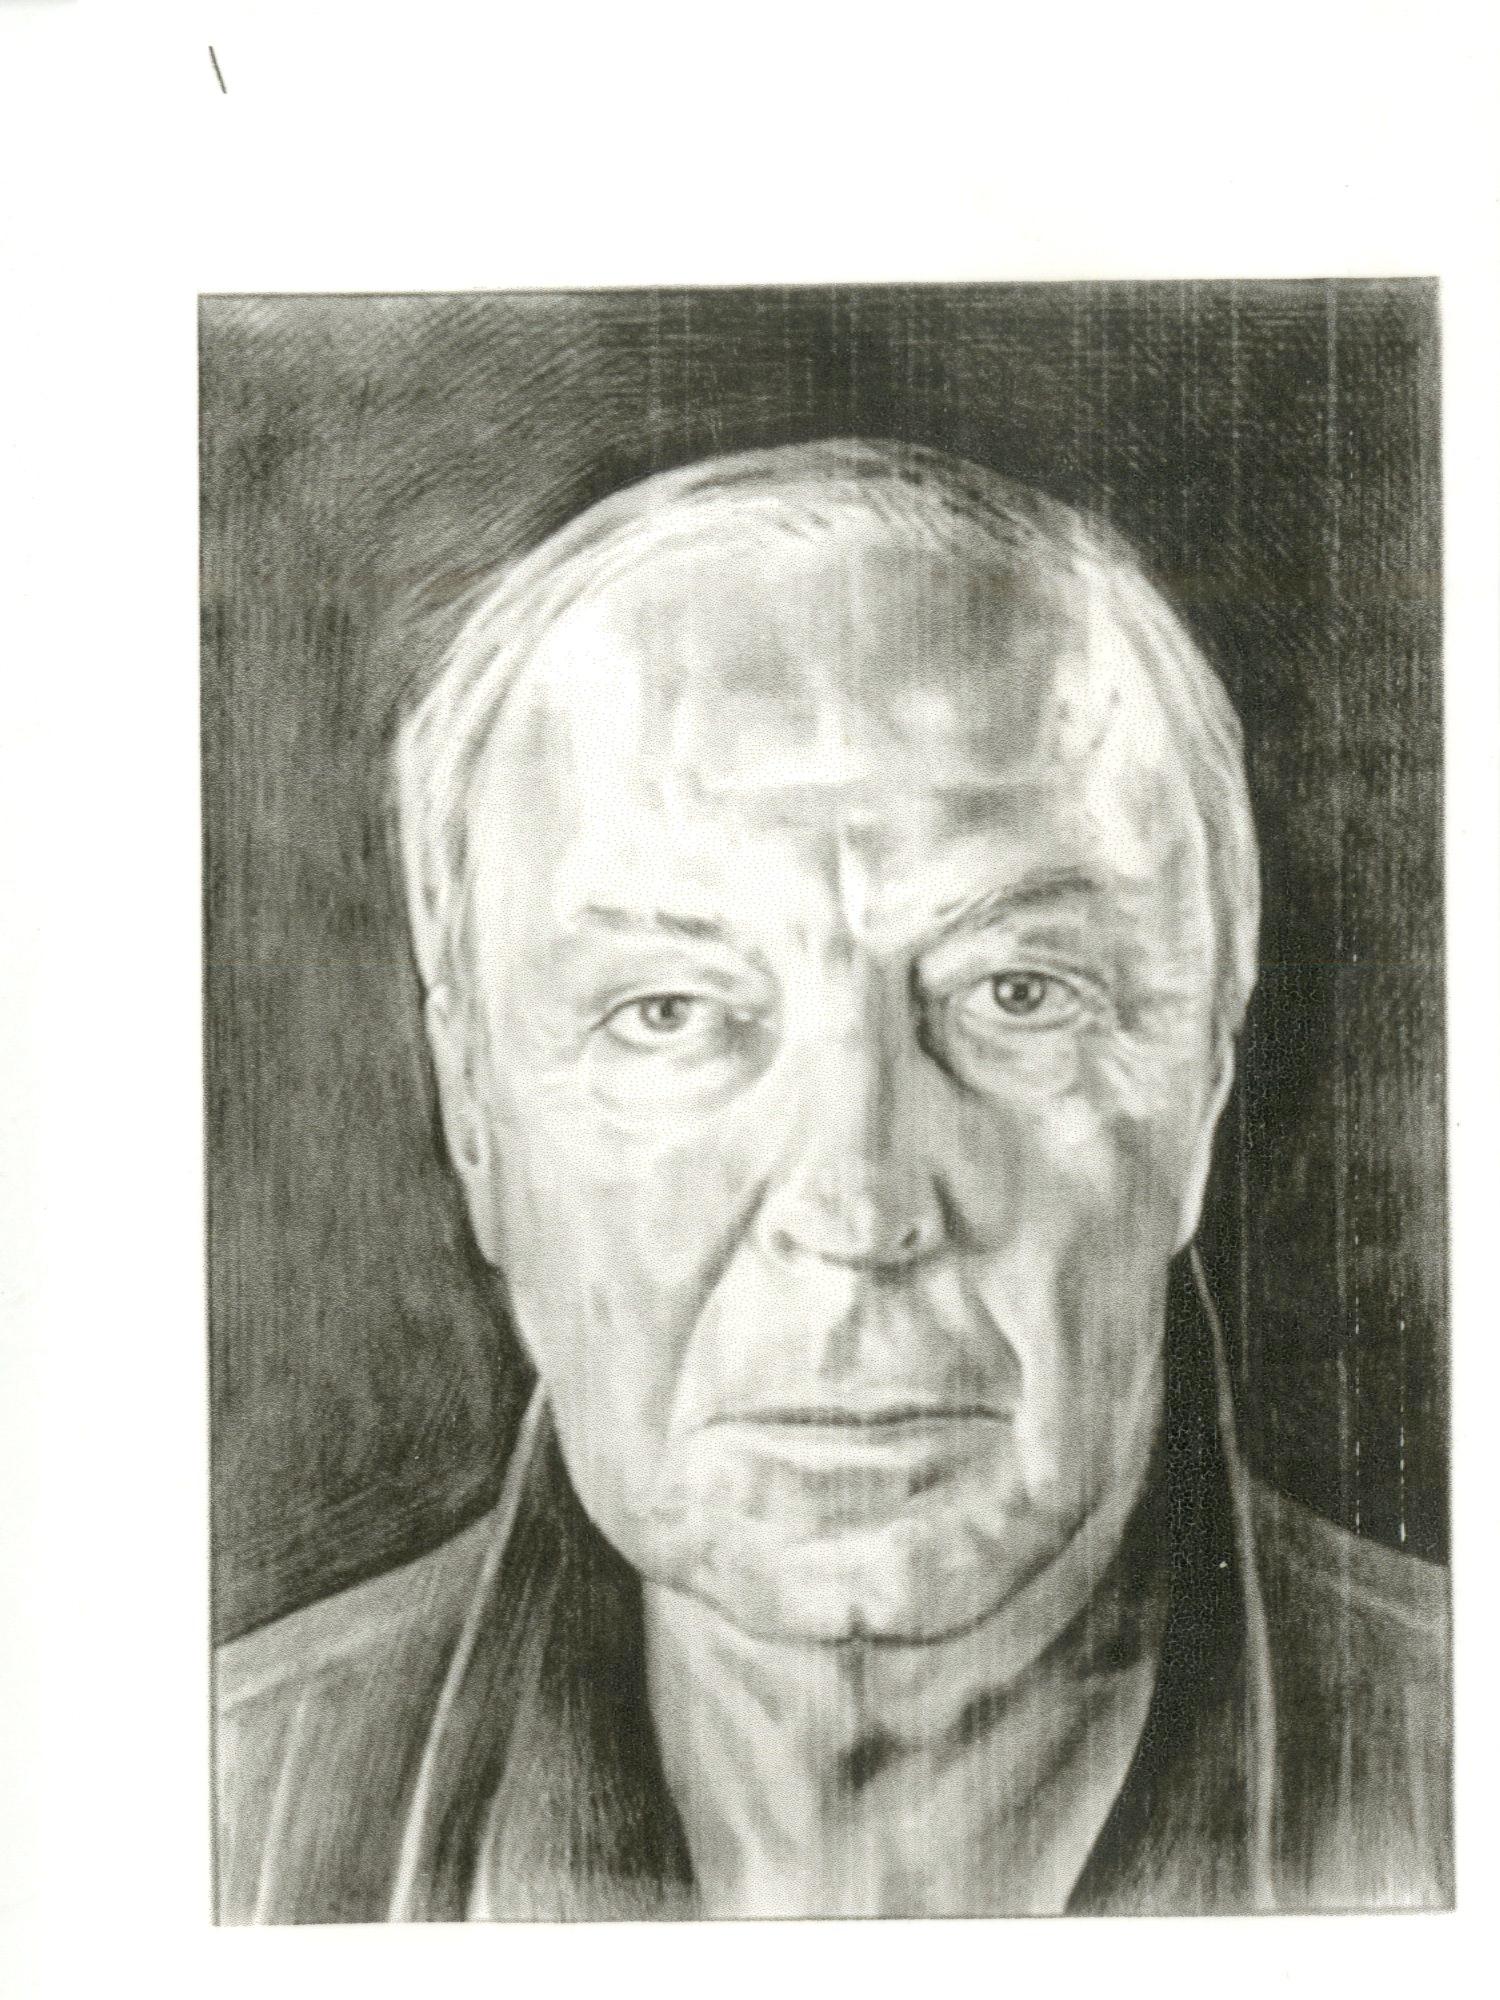 Jasper Johns and Phong Bui
Offset lithograph card of portrait of Jasper Johns by Phong Bui (hand signed and dated by Jasper Johns), 2008
Card depicting a portrait of Jasper Johns by Phong Bui
Hand signed and dated 12 May 08 by Jasper Johns on the